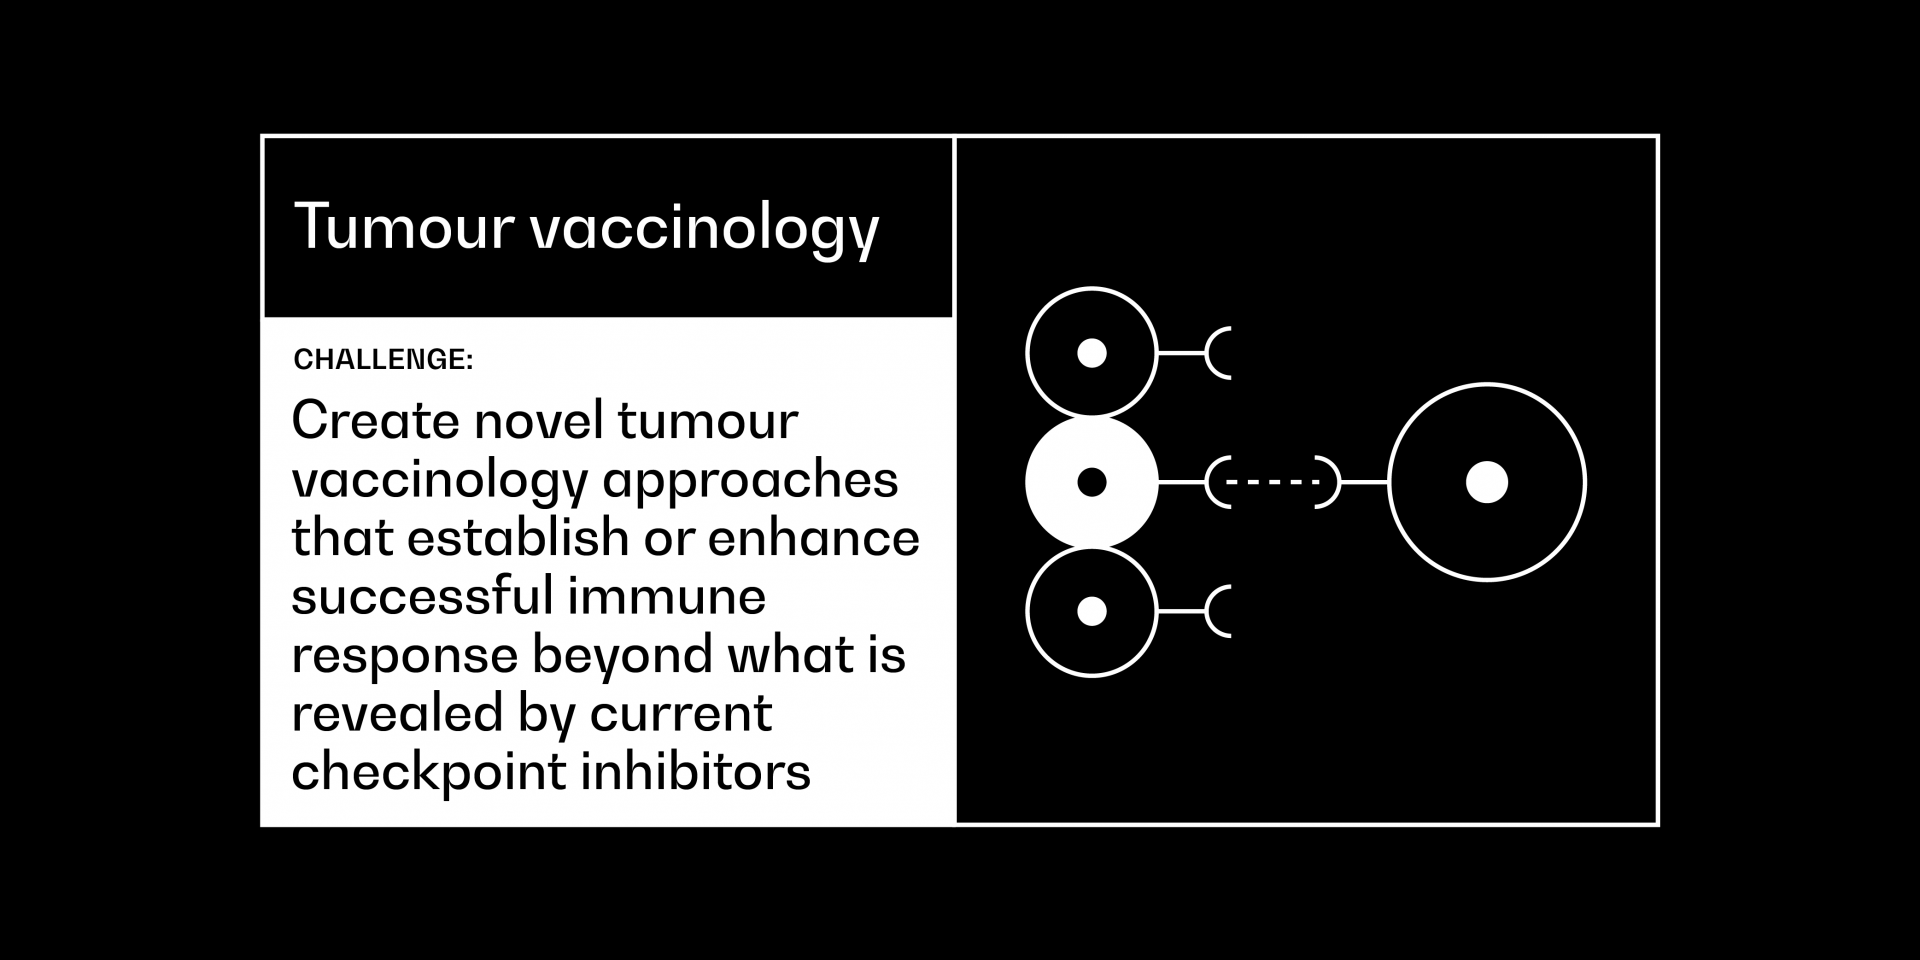 Tumour vaccinology cancer grand challenge